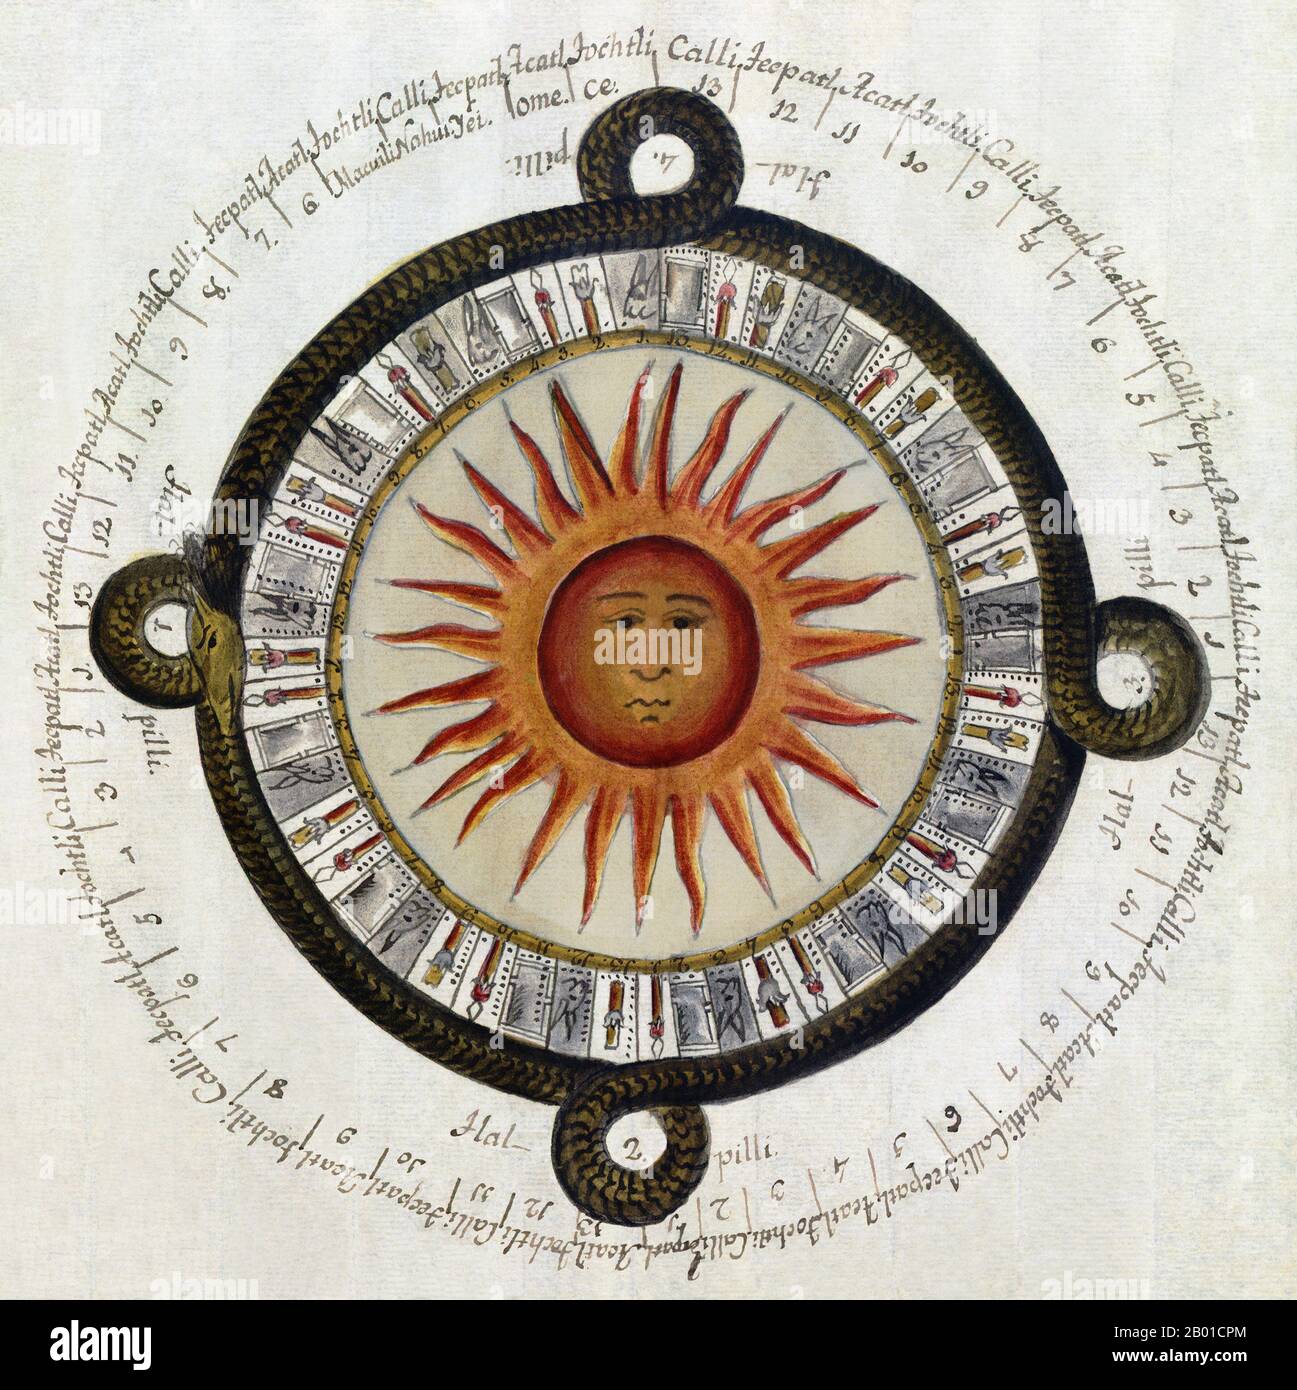 Mexico: An illustration depicting an ancient Aztec calendar found in Mexico City, by Antonio de Leon y Gama (1735-1802), 1792.  An illustration depicting an ancient Mexican calendar. The Maya and Aztec calendars are the most familiar of the Mexican calendars, but similar ones were used by other cultures.  Common to all Mesoamerican cultures was the 260-day ritual calendar that had no confirmed correlation to astronomical or agricultural cycles.  These were used in combination with a separate 365-day calendar to create a 52-year cycle known as a calendar round. Stock Photo